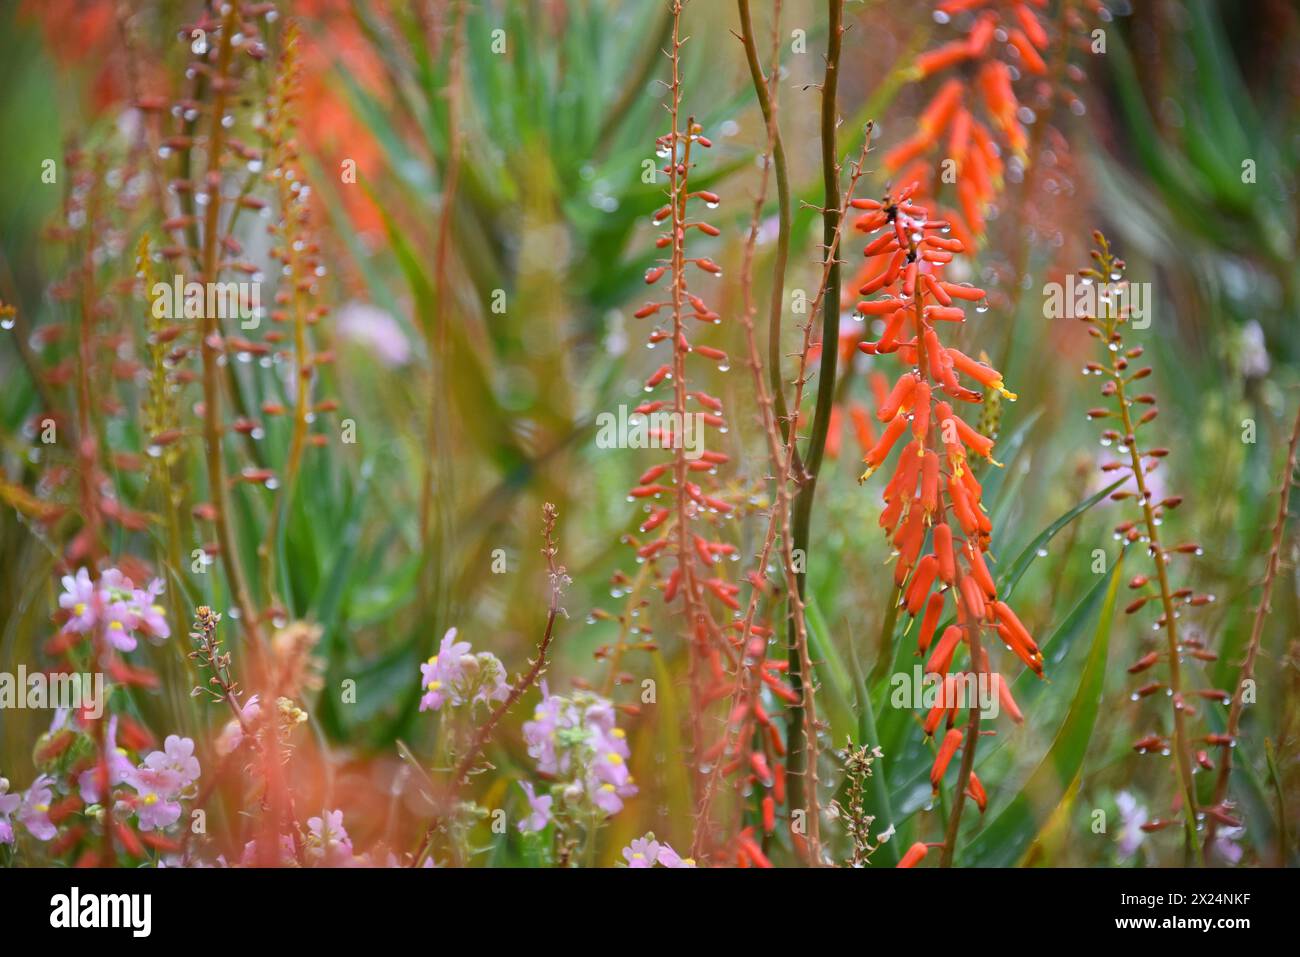 A large format close up view of raindrops glistening on a variety of colorful flowers in the Kirstenbosch botanical gardens, Cape Town, South Africa. Stock Photo